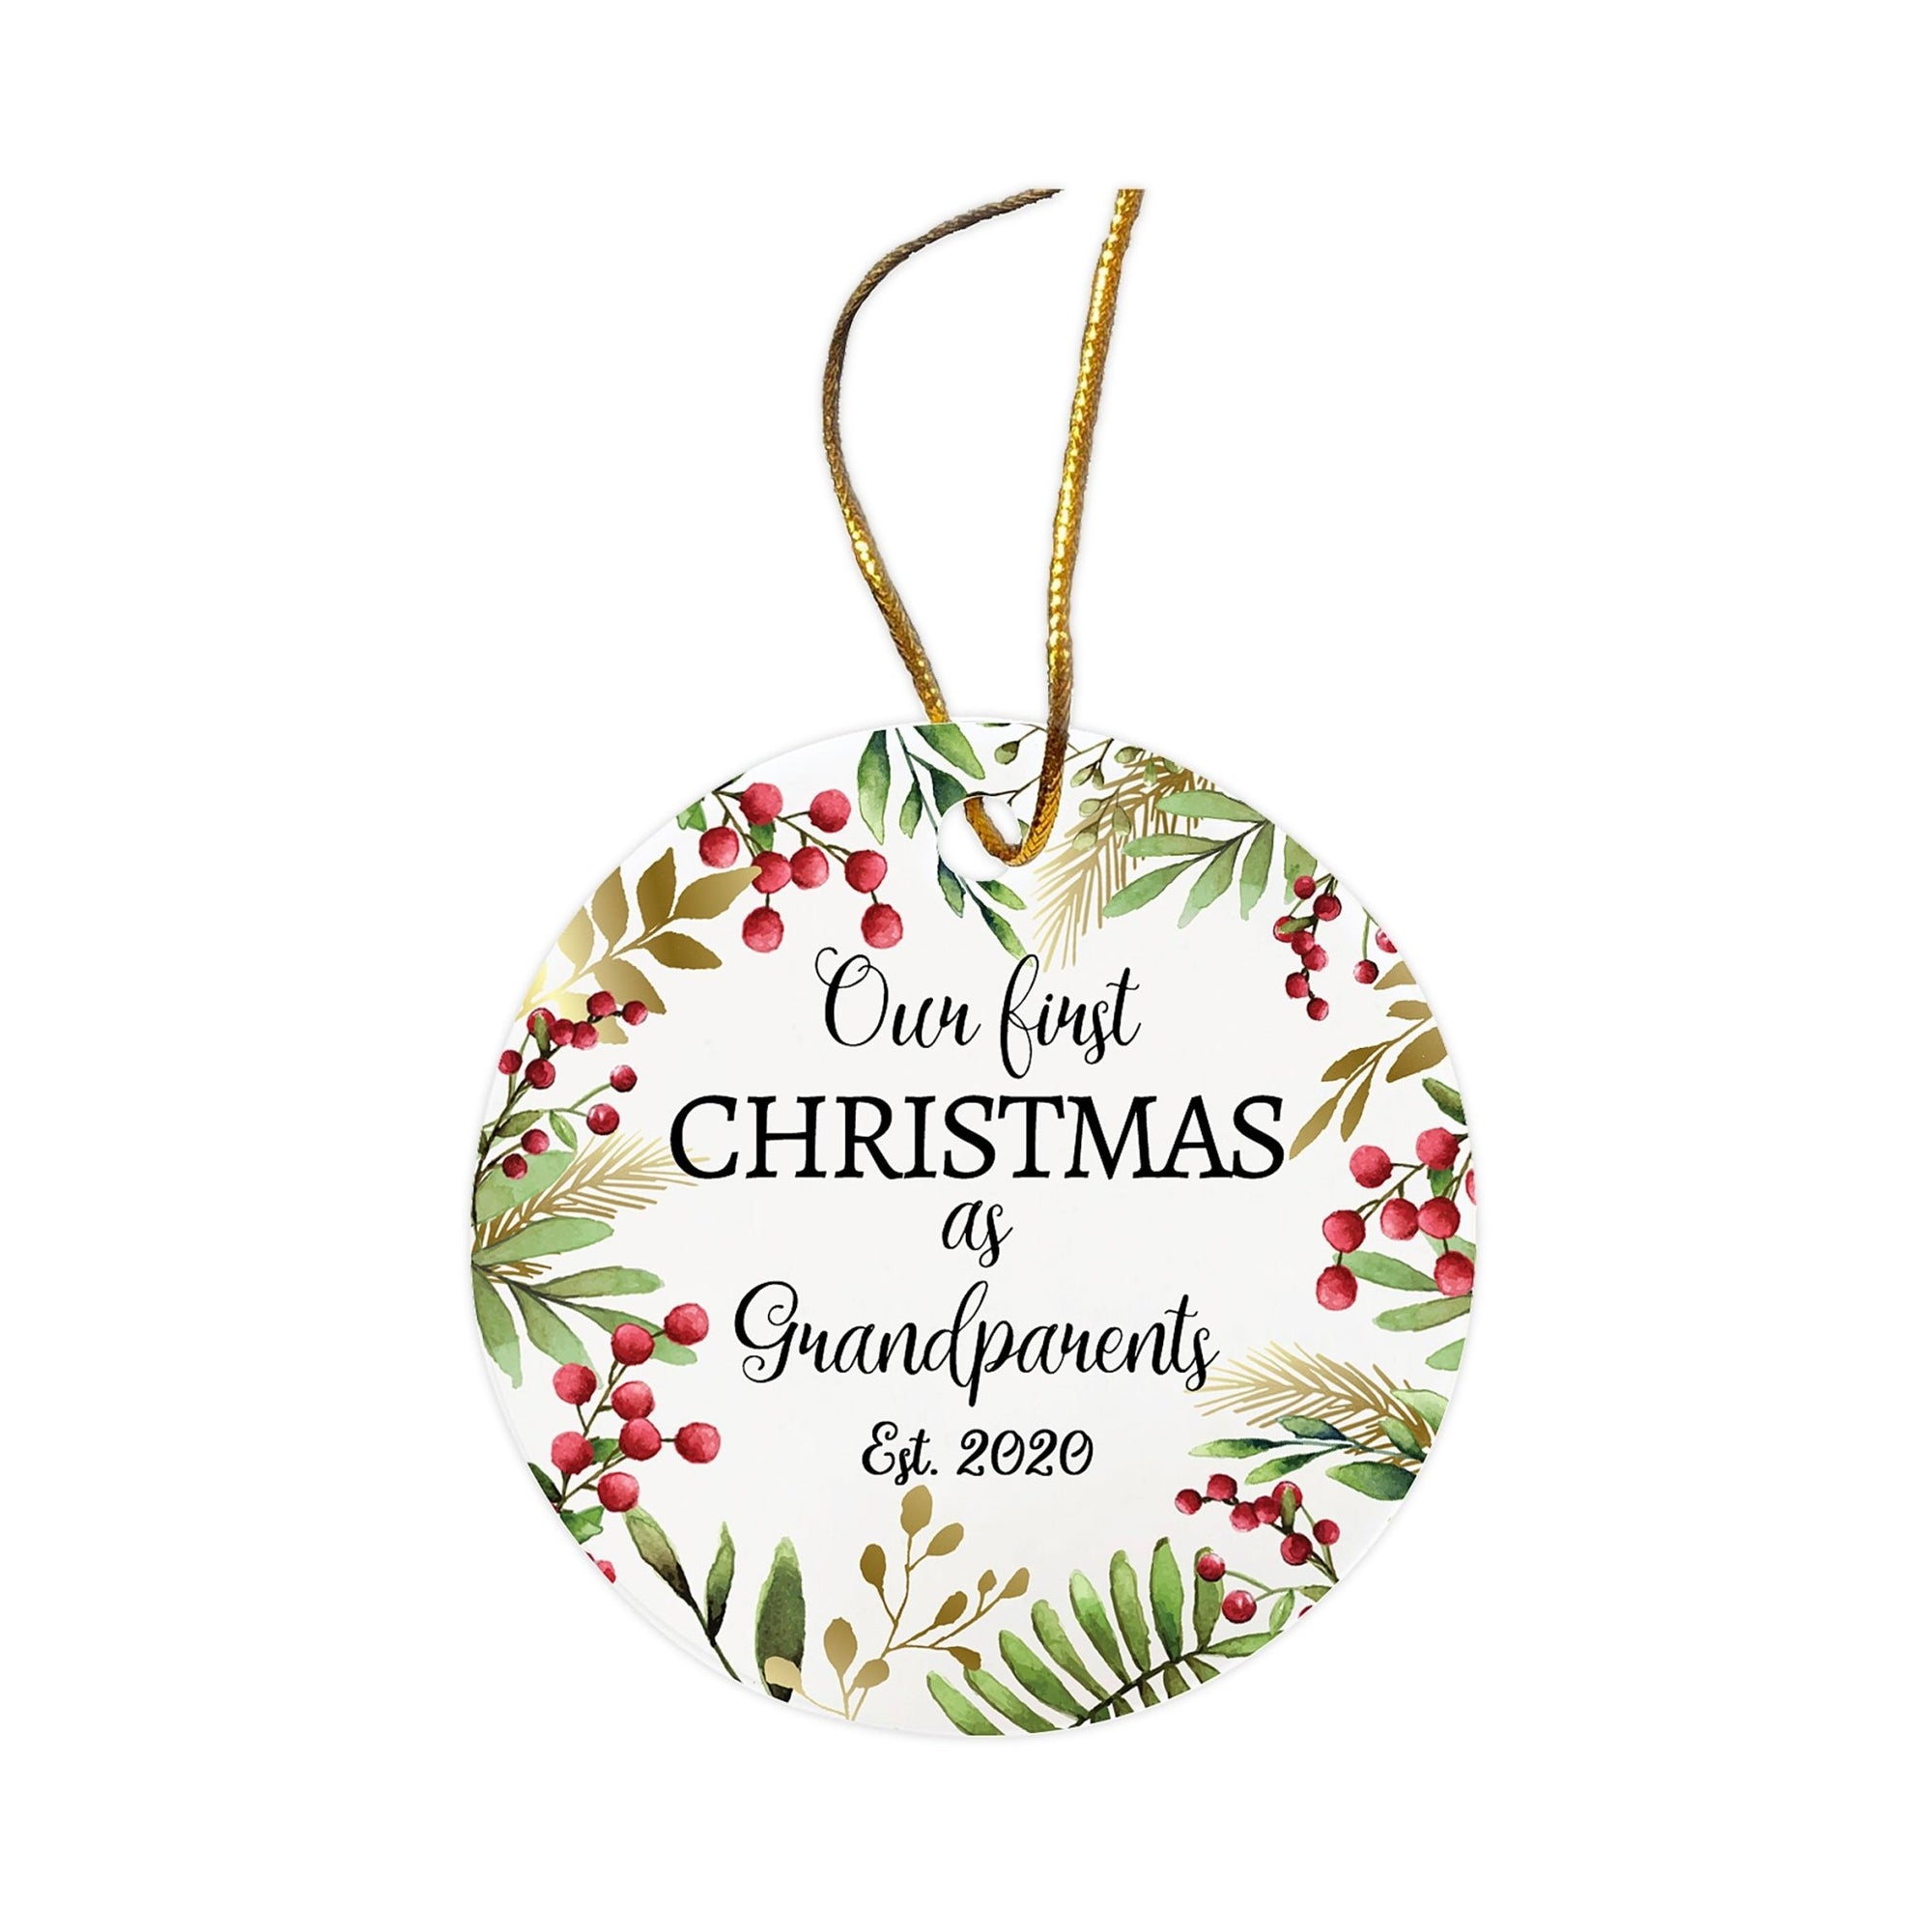 Personalized 2.75in Christmas Ceramic White Round Ornament for Grandparents - Our First Christmas as Grandparents - LifeSong Milestones